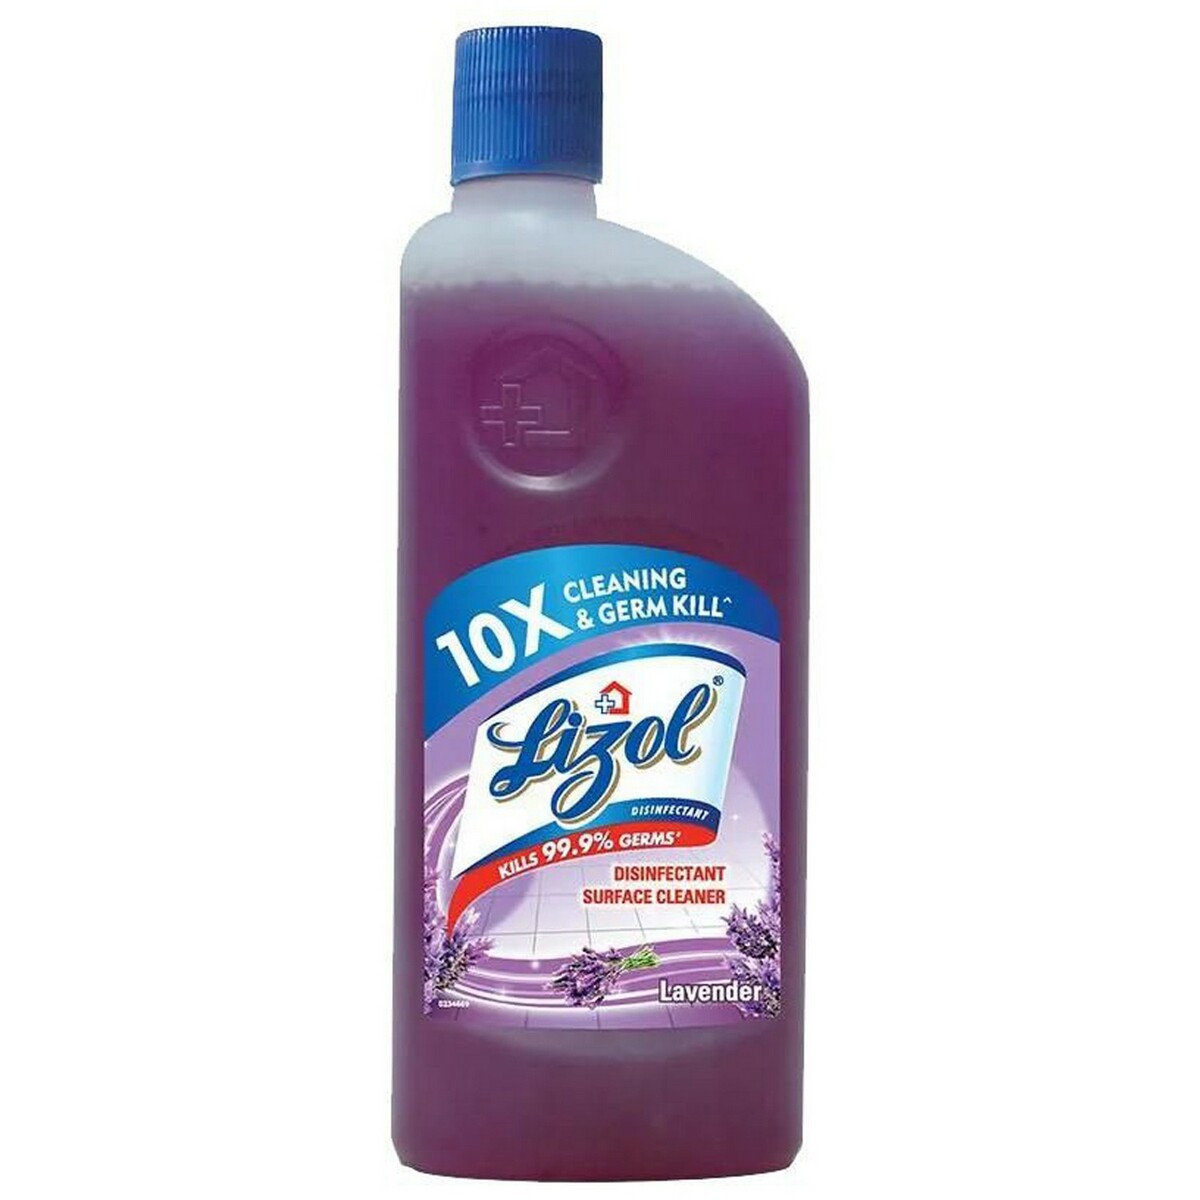 Lizol Disinfectant Surface Cleaner Lavender 500ml